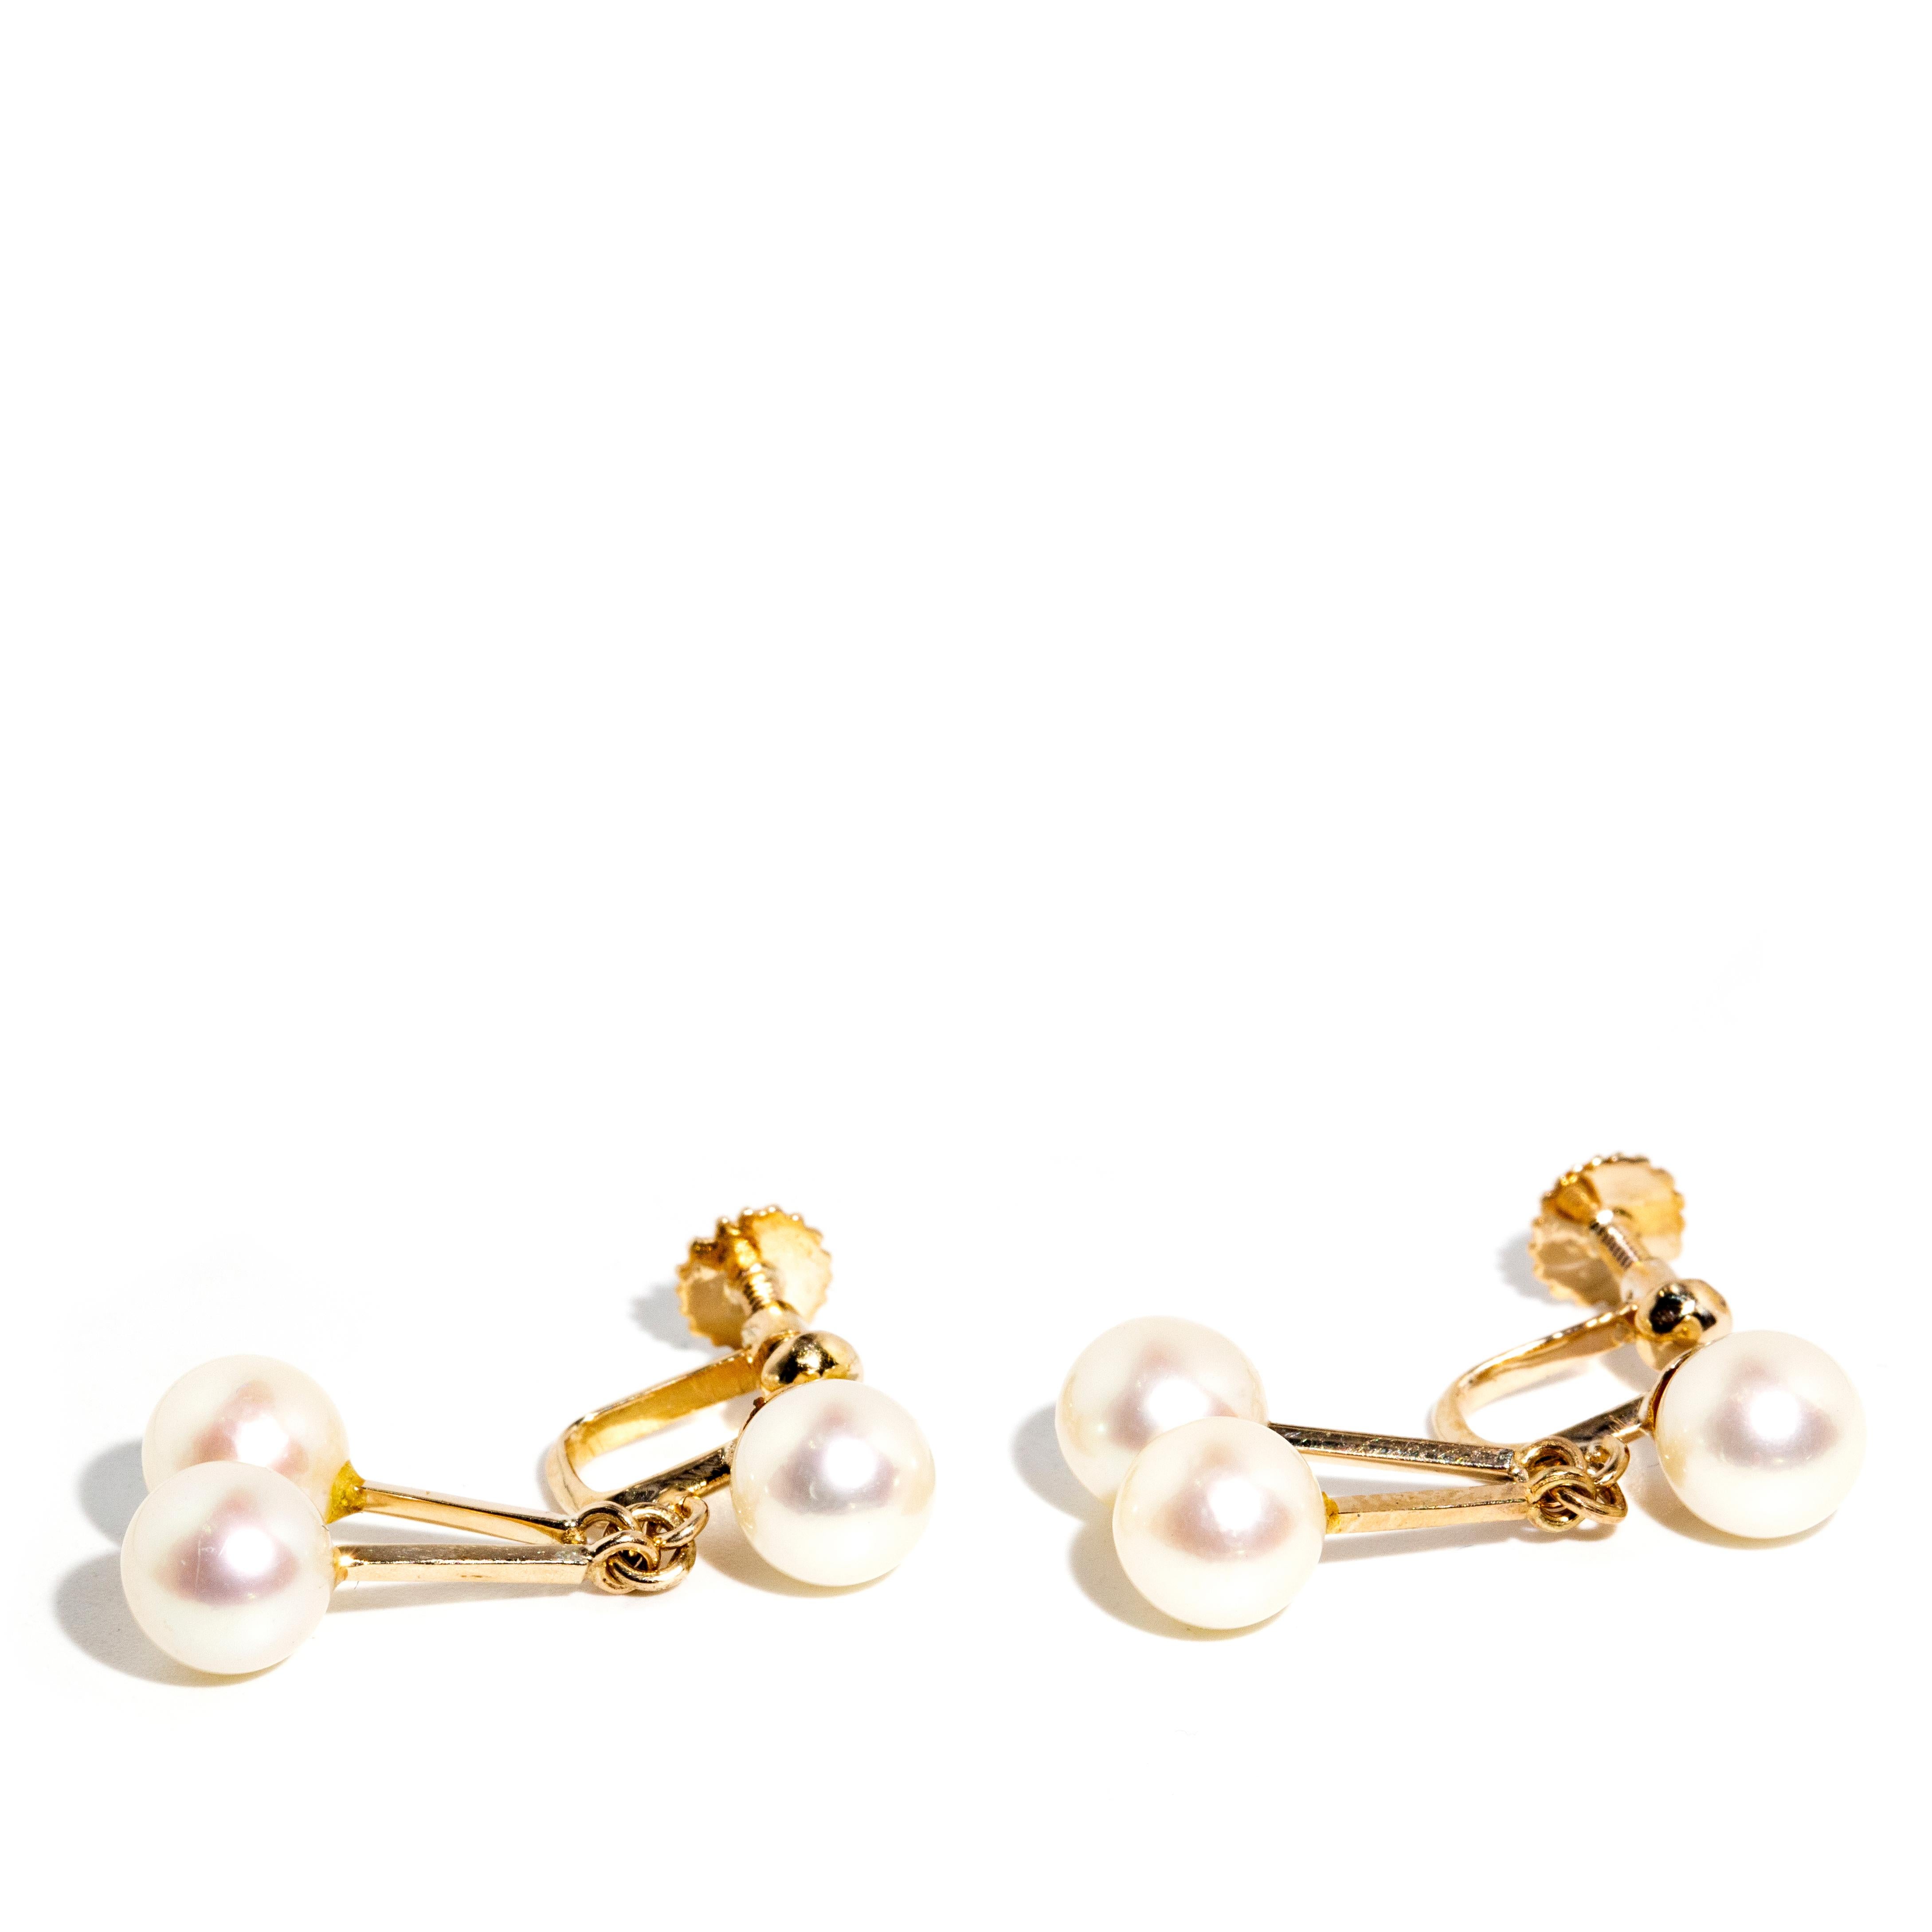 Modern Vintage Circa 1970s Vintage Cultured Pearl Clip On Earrings 14 Carat Yellow Gold For Sale